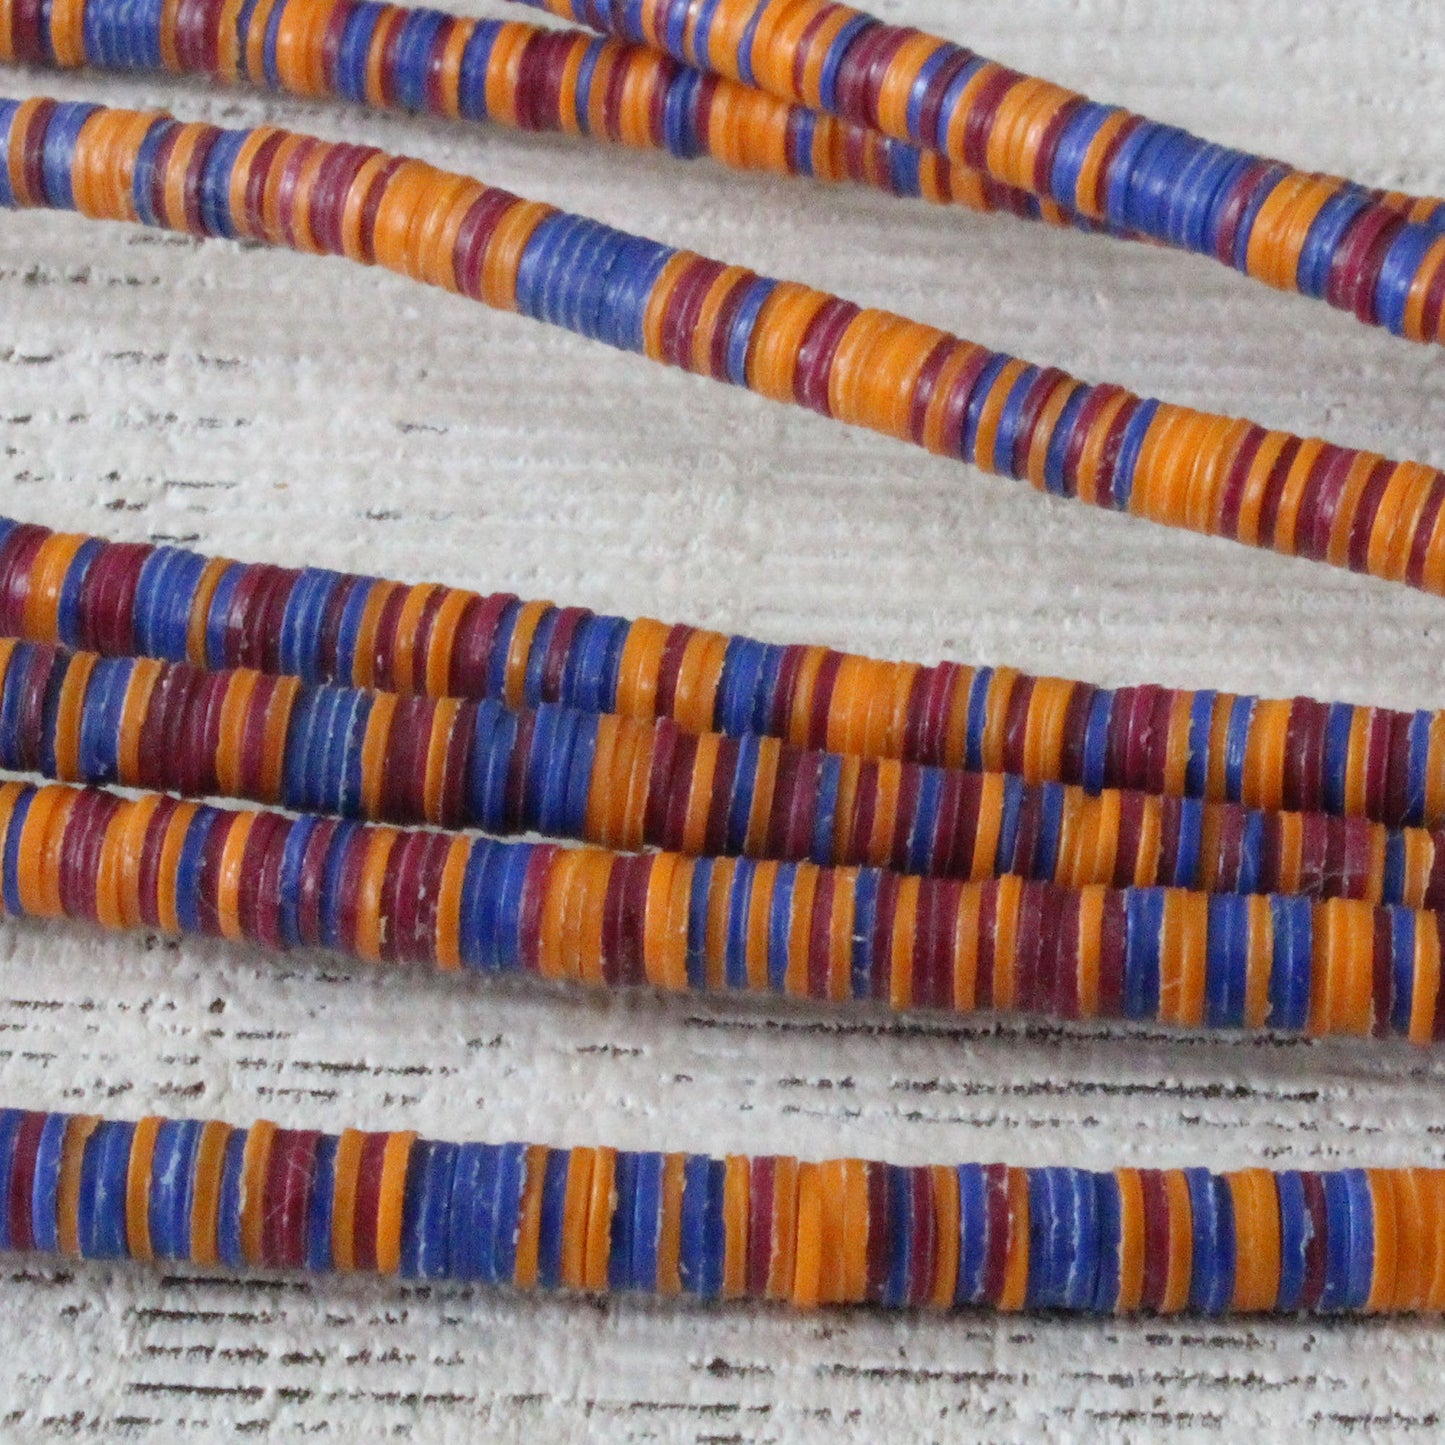 Load image into Gallery viewer, African Made Recycled Vinyl Disks - Colorful Recycled Beads - 33 Inch Strand
